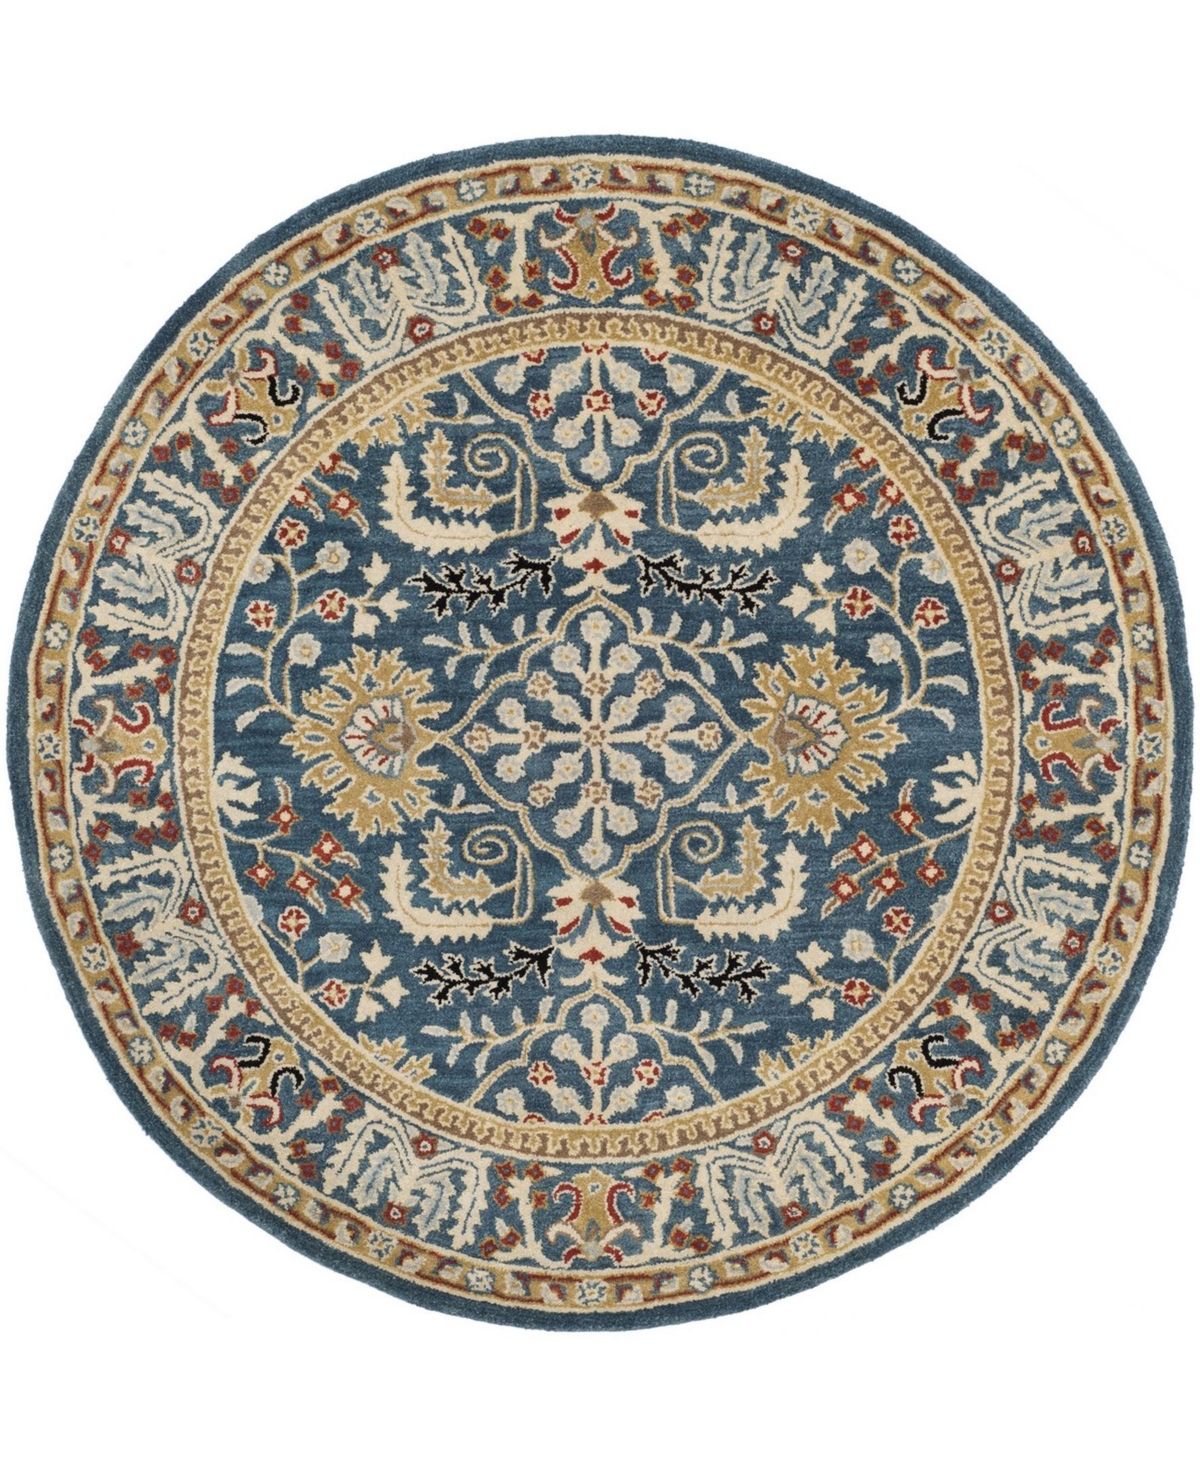 Safavieh Antiquity At64 Navy and Multi 6' x 6' Round Area Rug - Navy